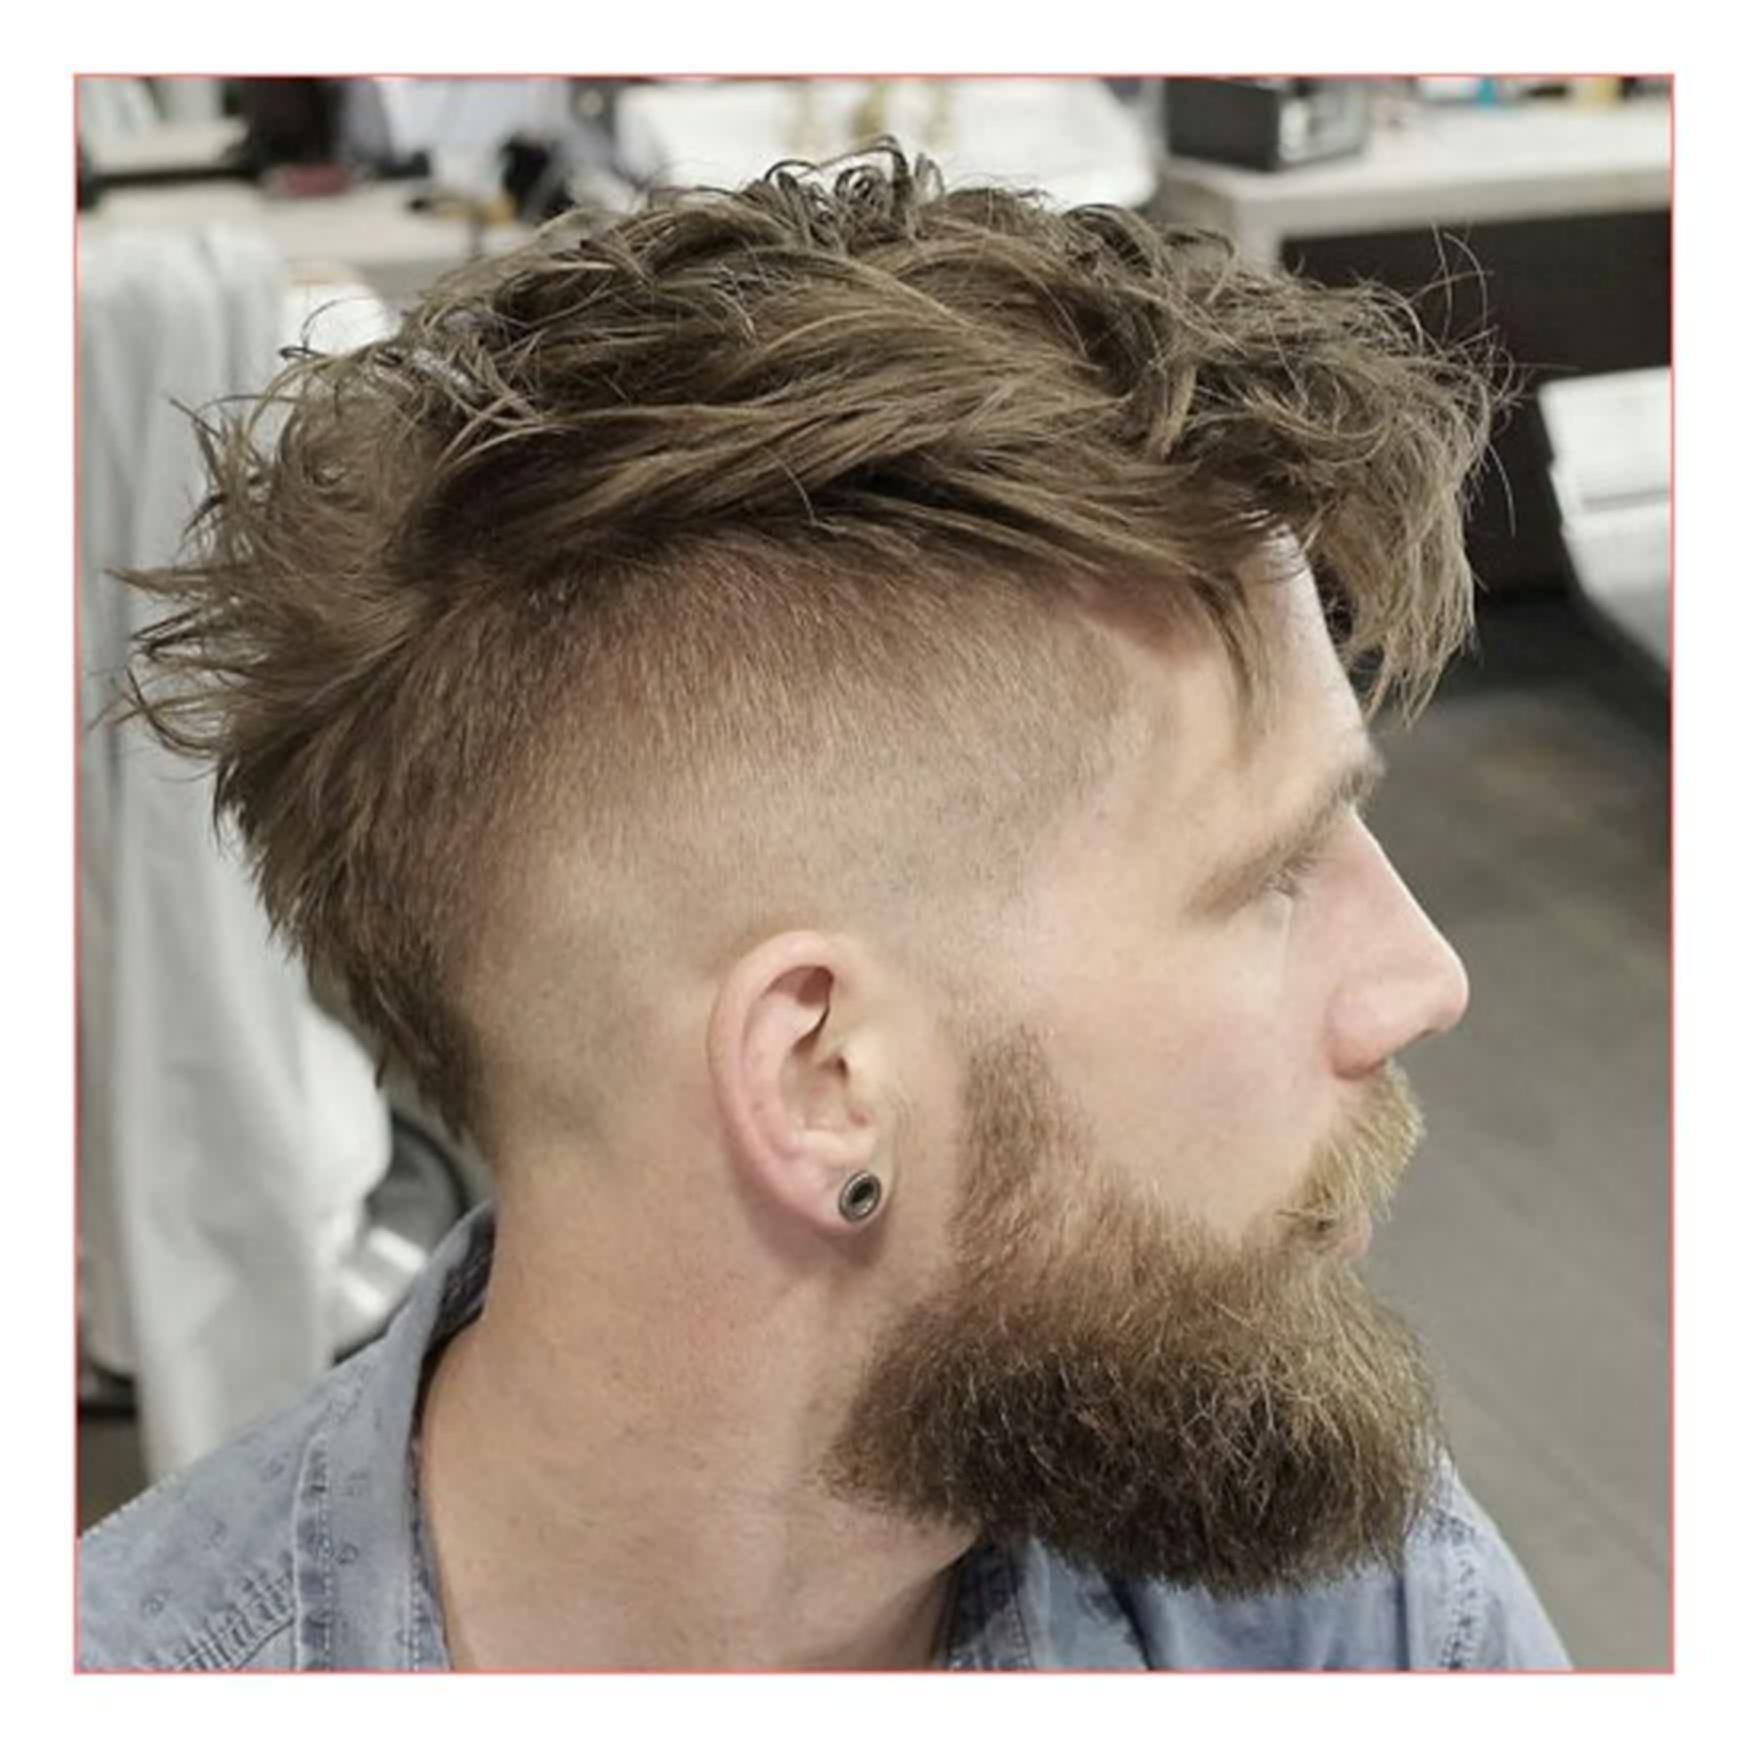 Long Hairstyles For Men Short Sides Men Hairstyles Short Sides Long Intended For Newest Fauxhawk Hairstyles With Front Top Locks (View 6 of 20)